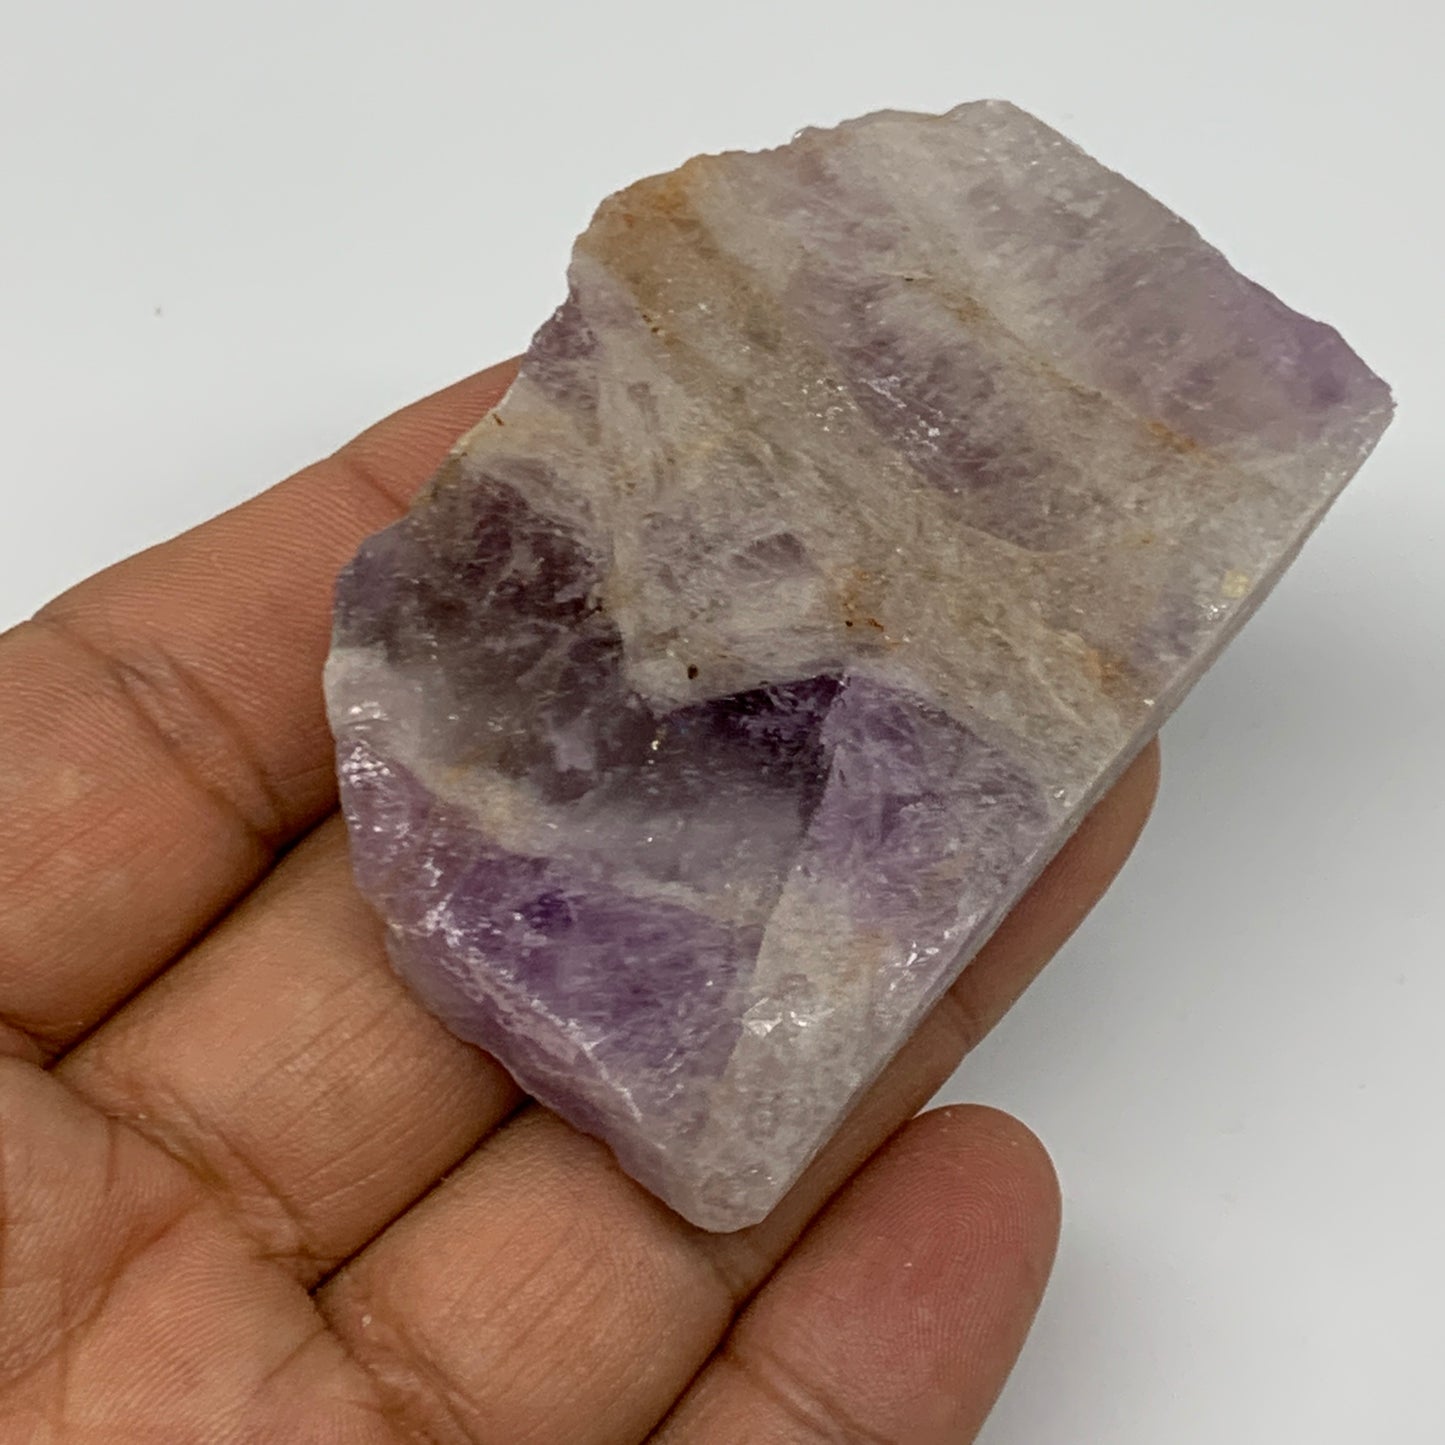 69.7g, 2.5"x1.7"x0.5", One face polished Banned Amethyst, One face semi polished